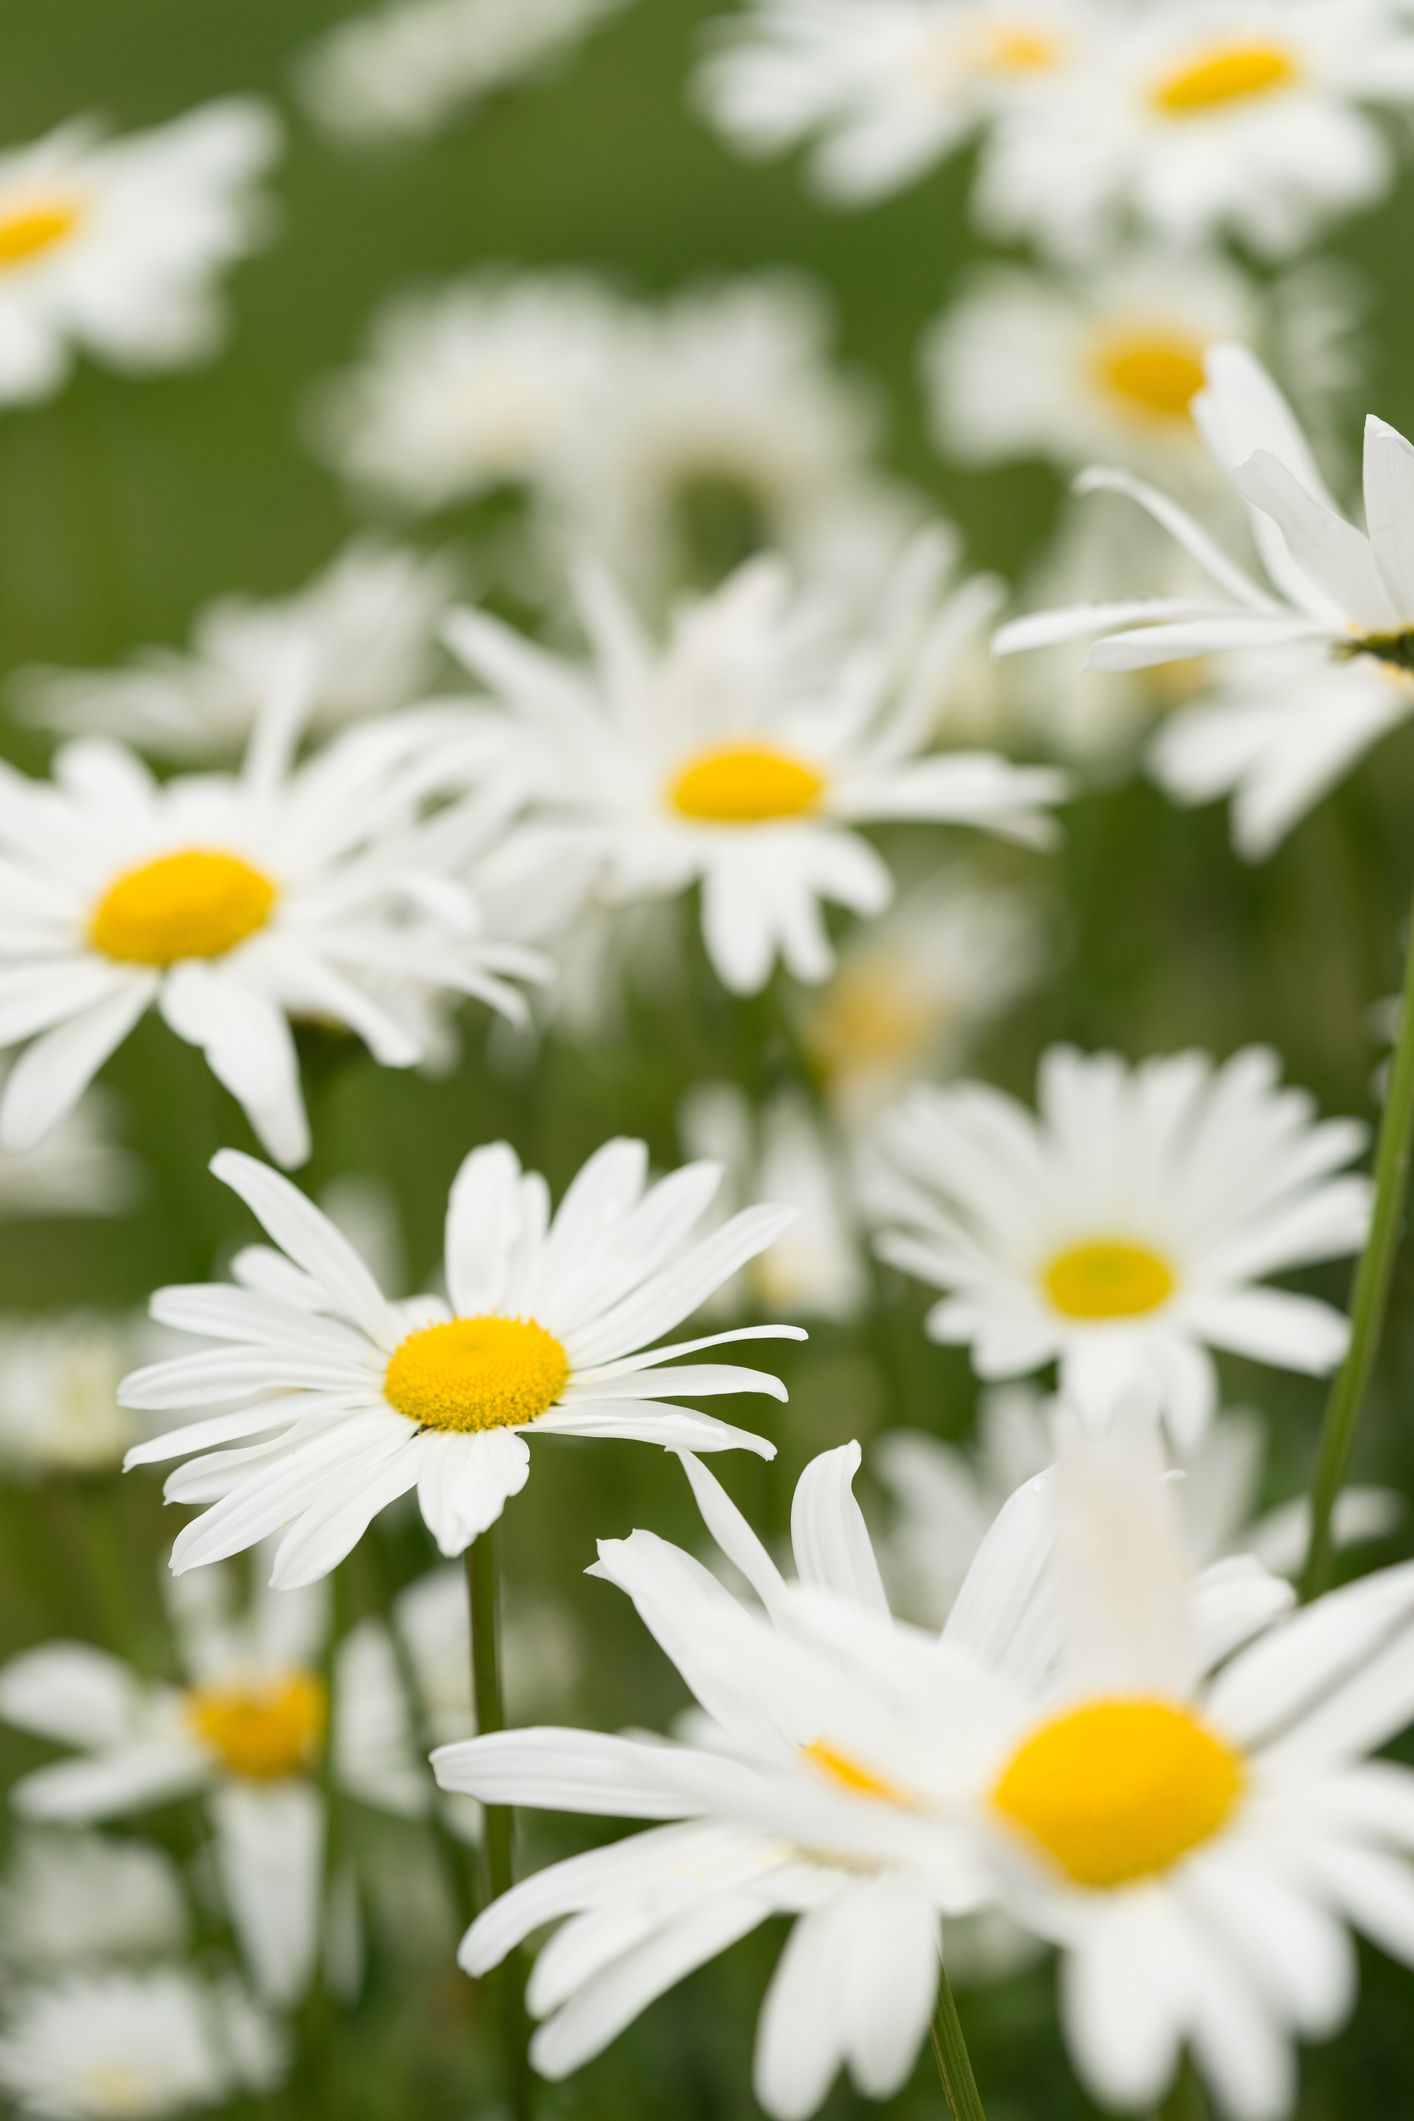 Pictures show of daisies me Shasta daisy